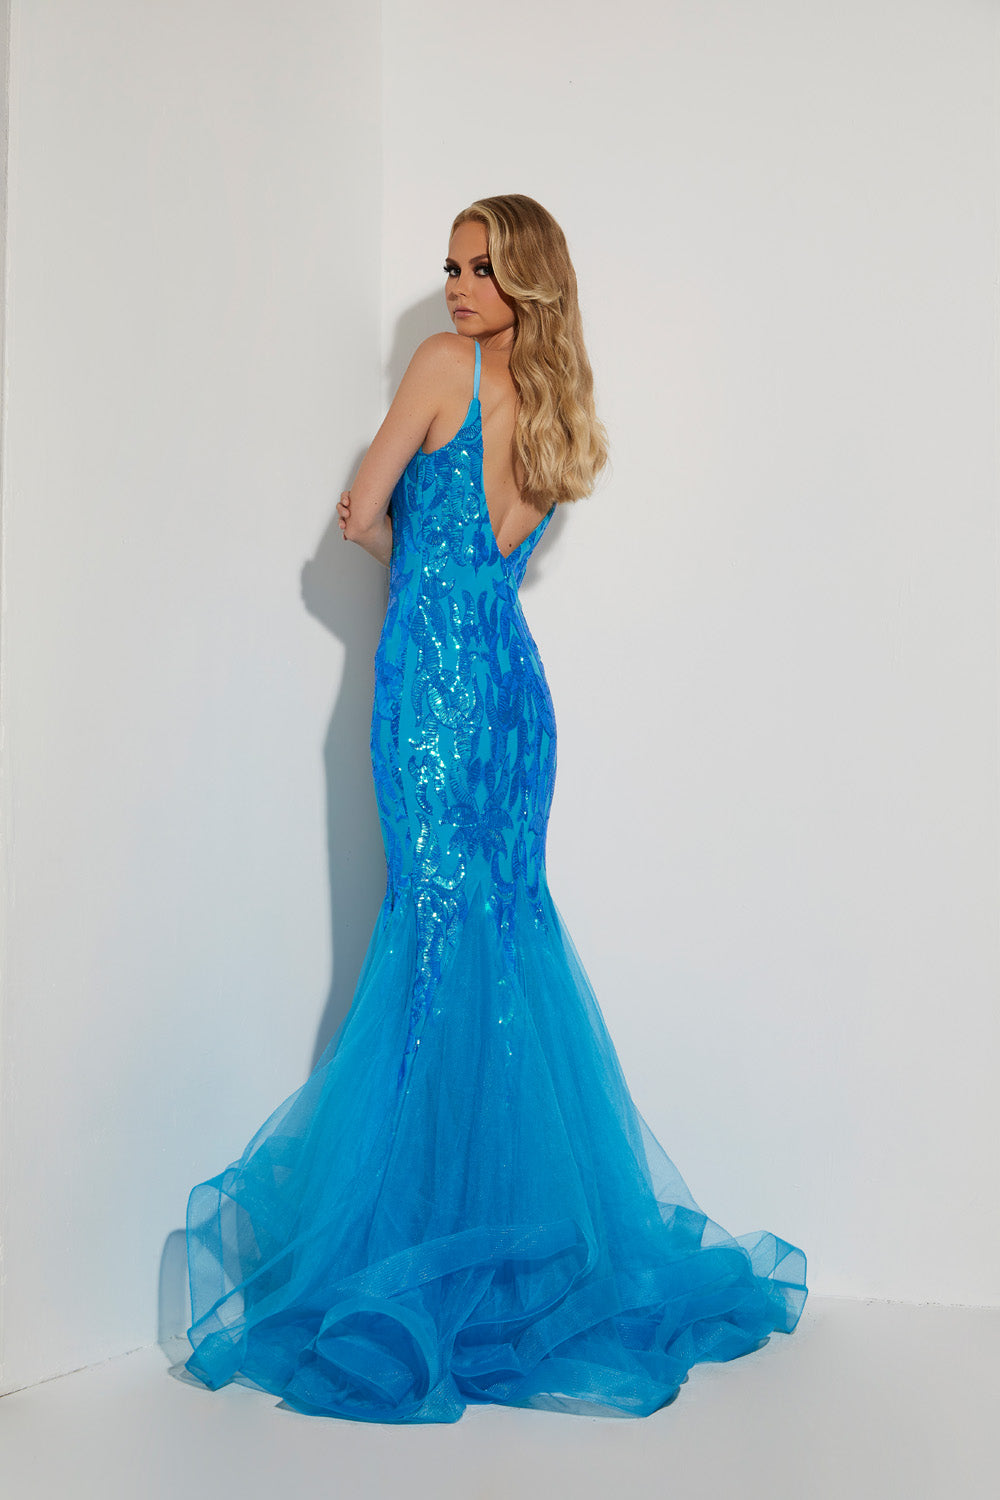 Jasz Couture 7443 prom dress images.  Jasz Couture 7443 is available in these colors: Fuchsia, Ocean Blue, Pink, Orange, Sky Blue, Yellow, Black Silver.